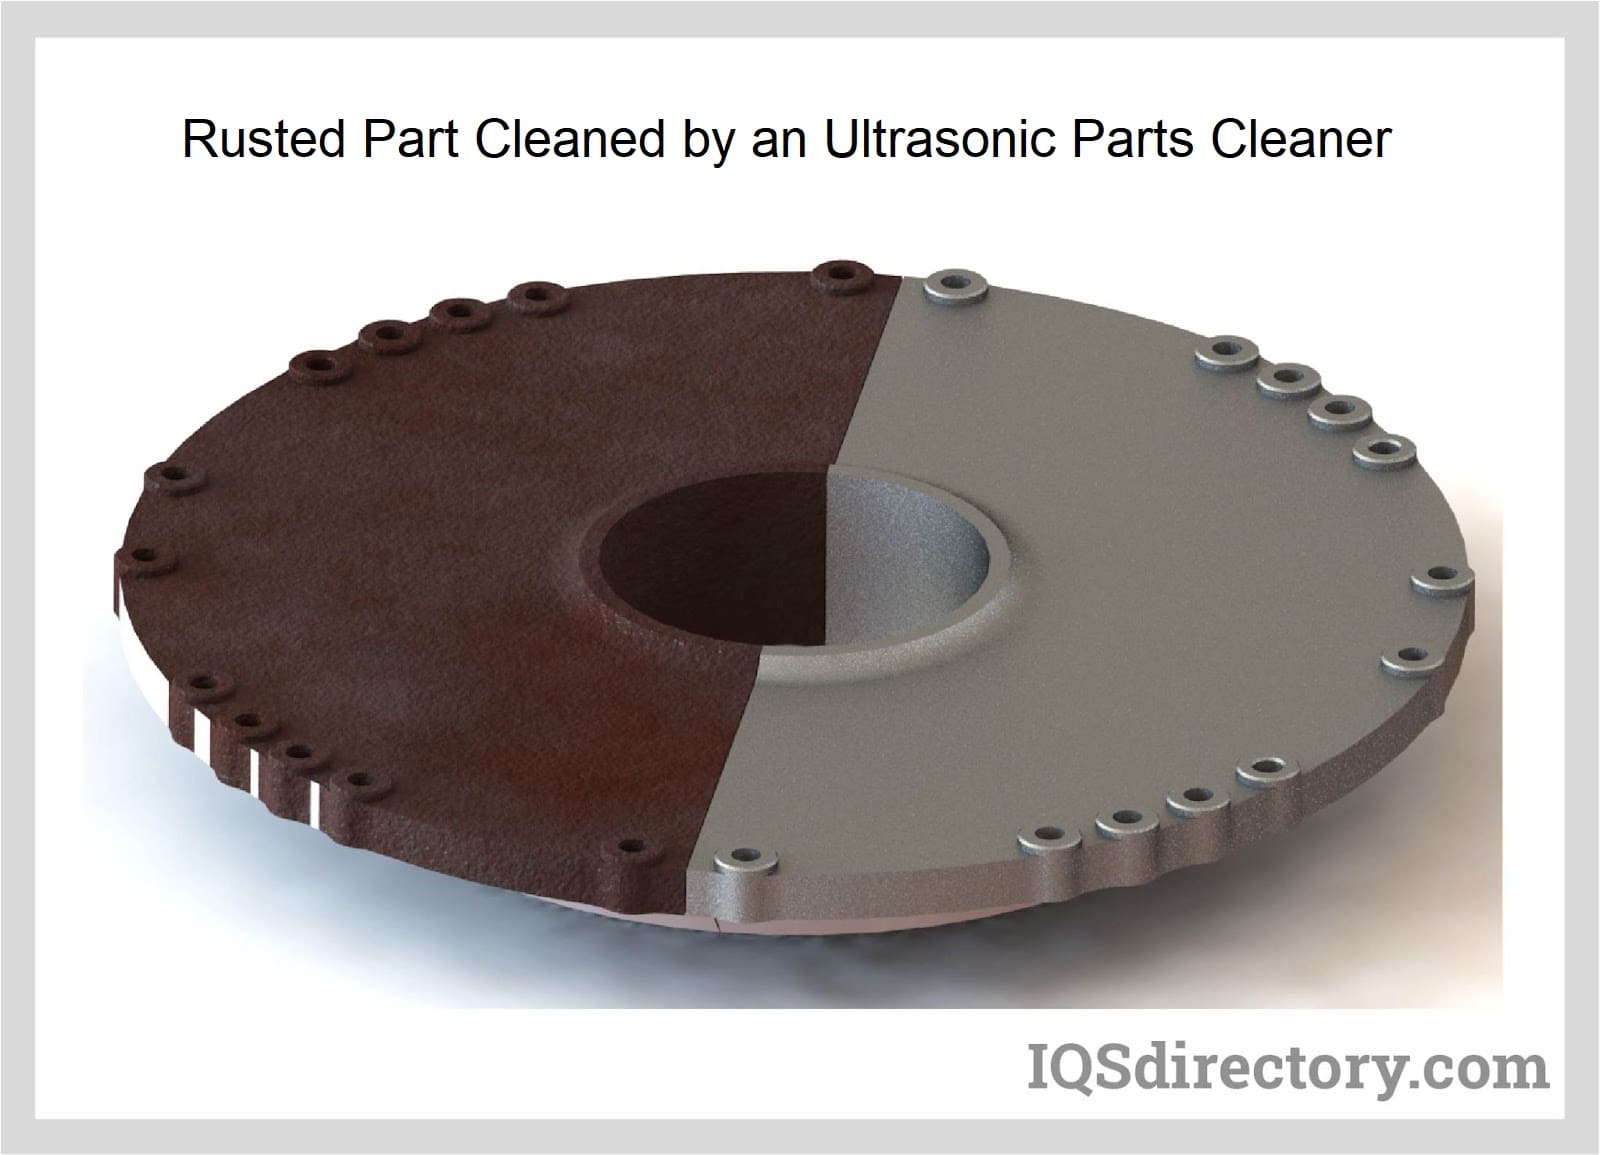 Rusted Part Cleaned by an Ultrasonic Parts Cleaner